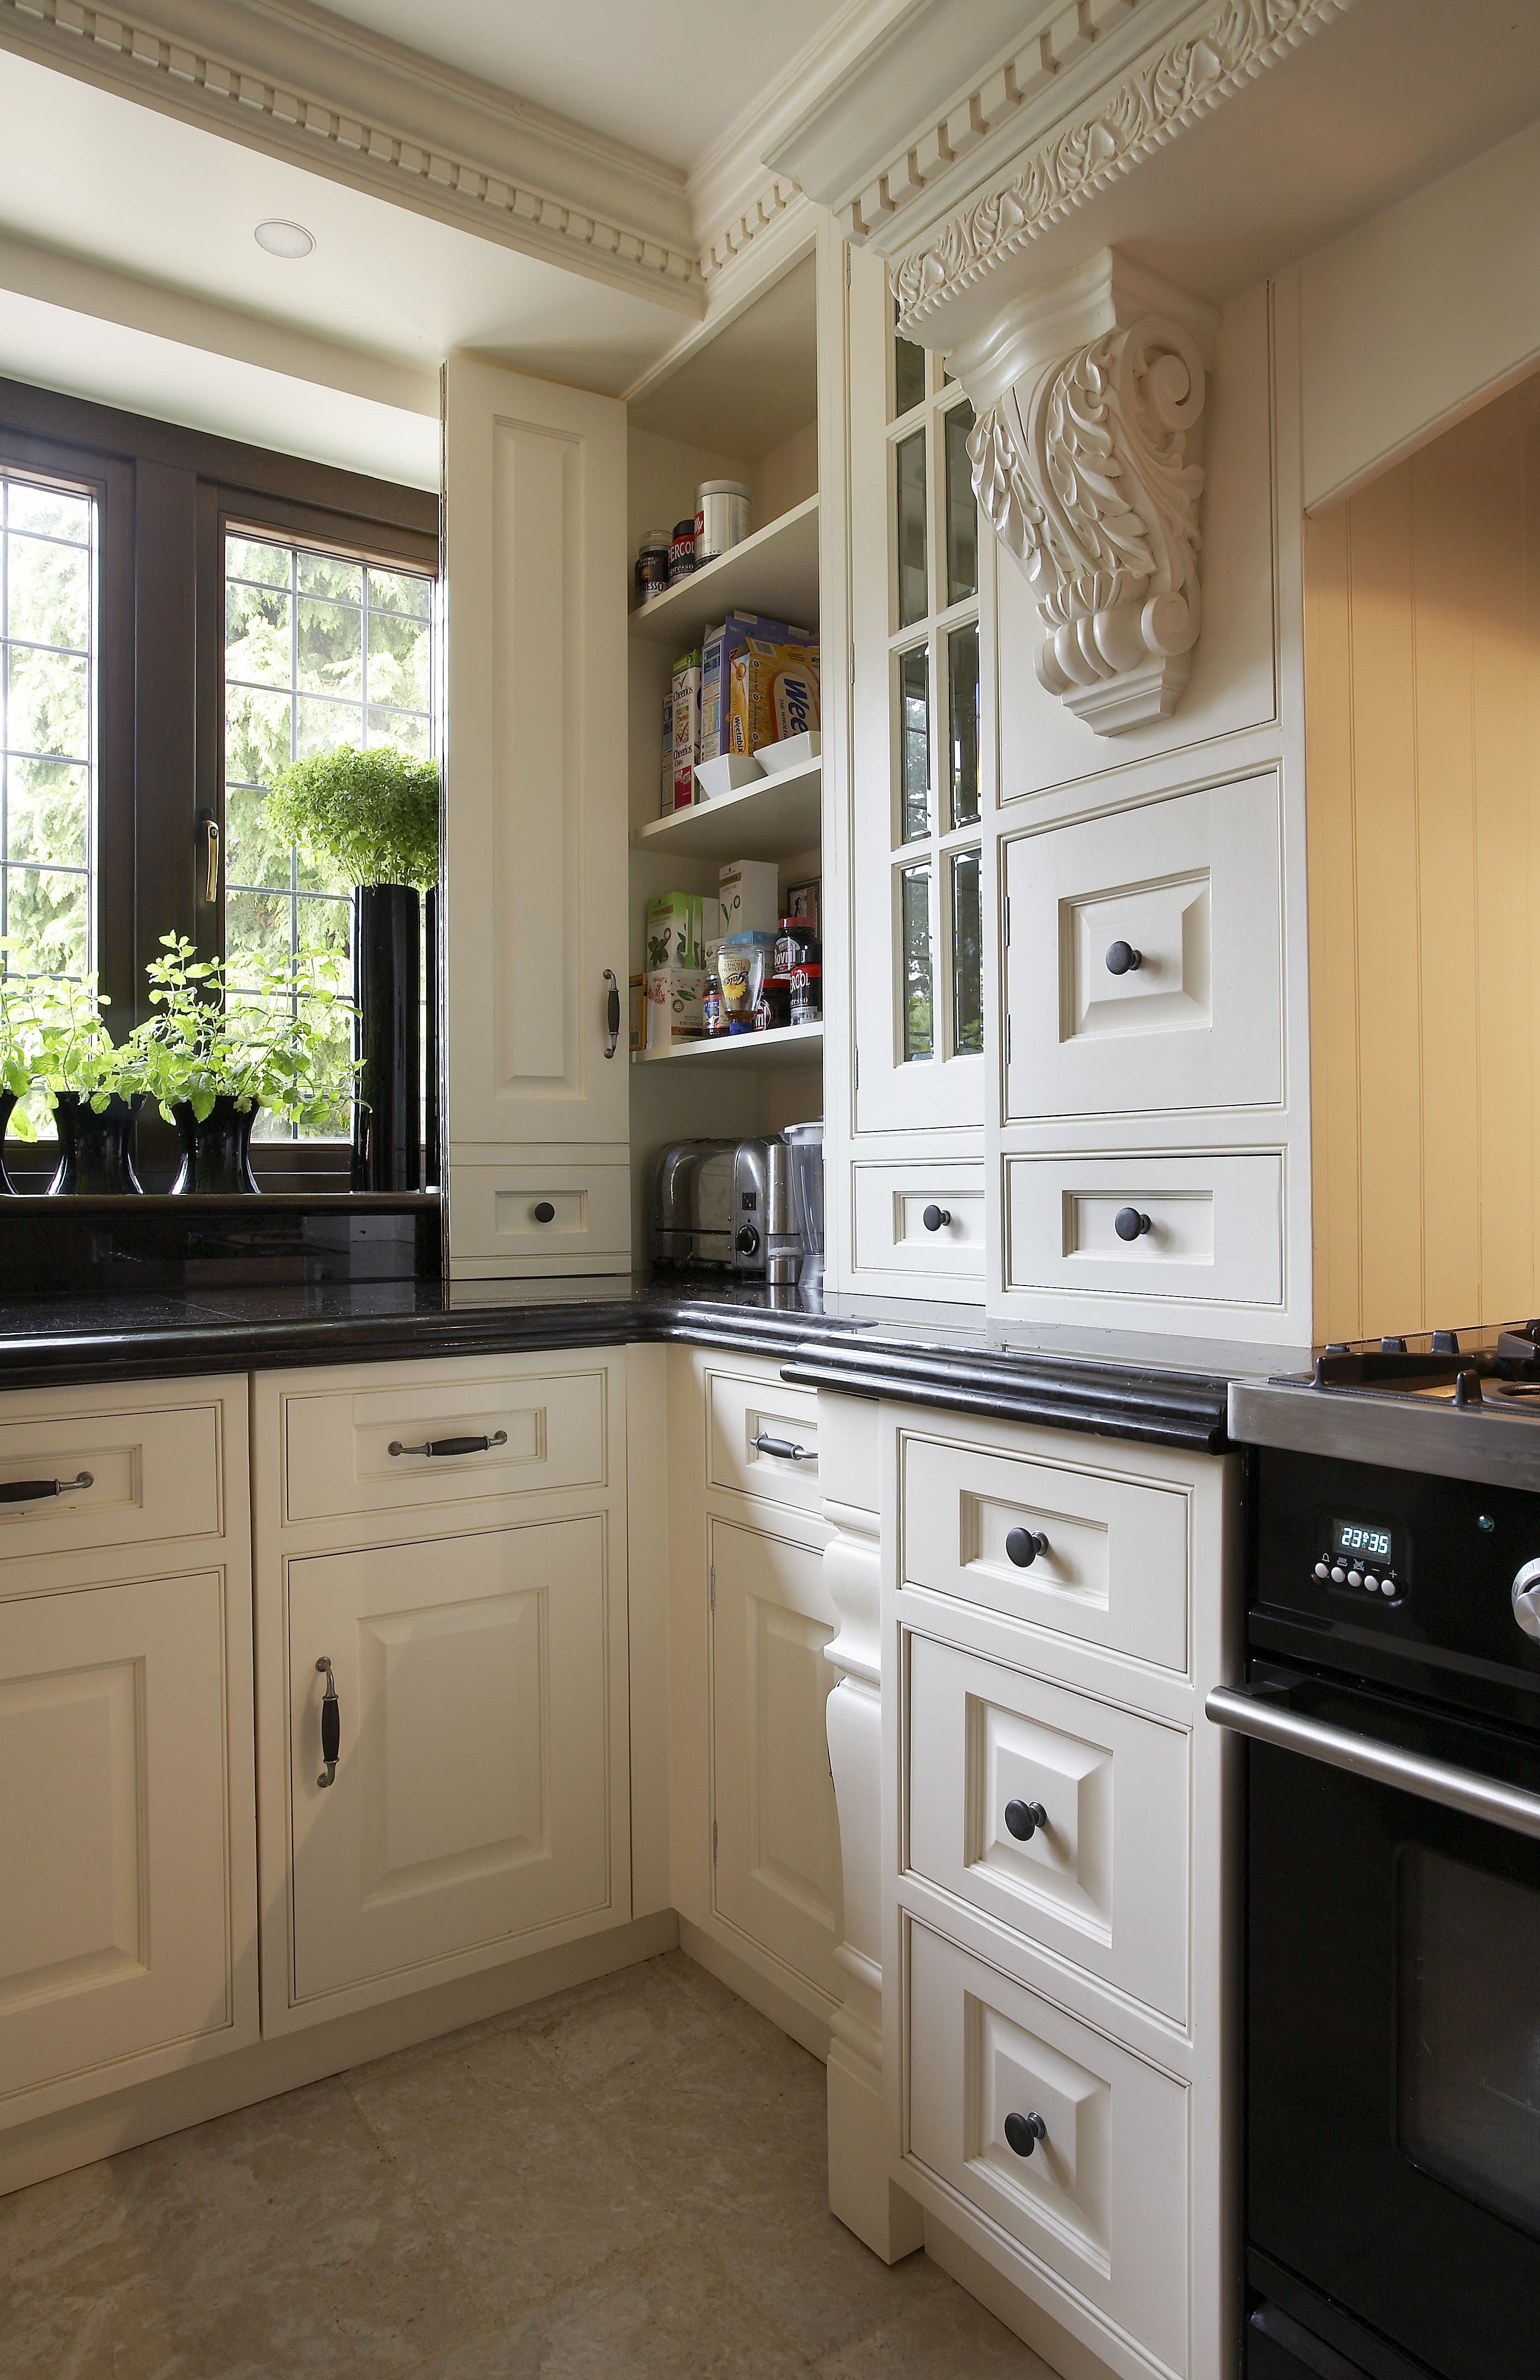  A traditional kitchen corner with classic cream-colored cabinetry featuring intricate cornice and corbel details. The cabinets are topped with a dark granite countertop. 